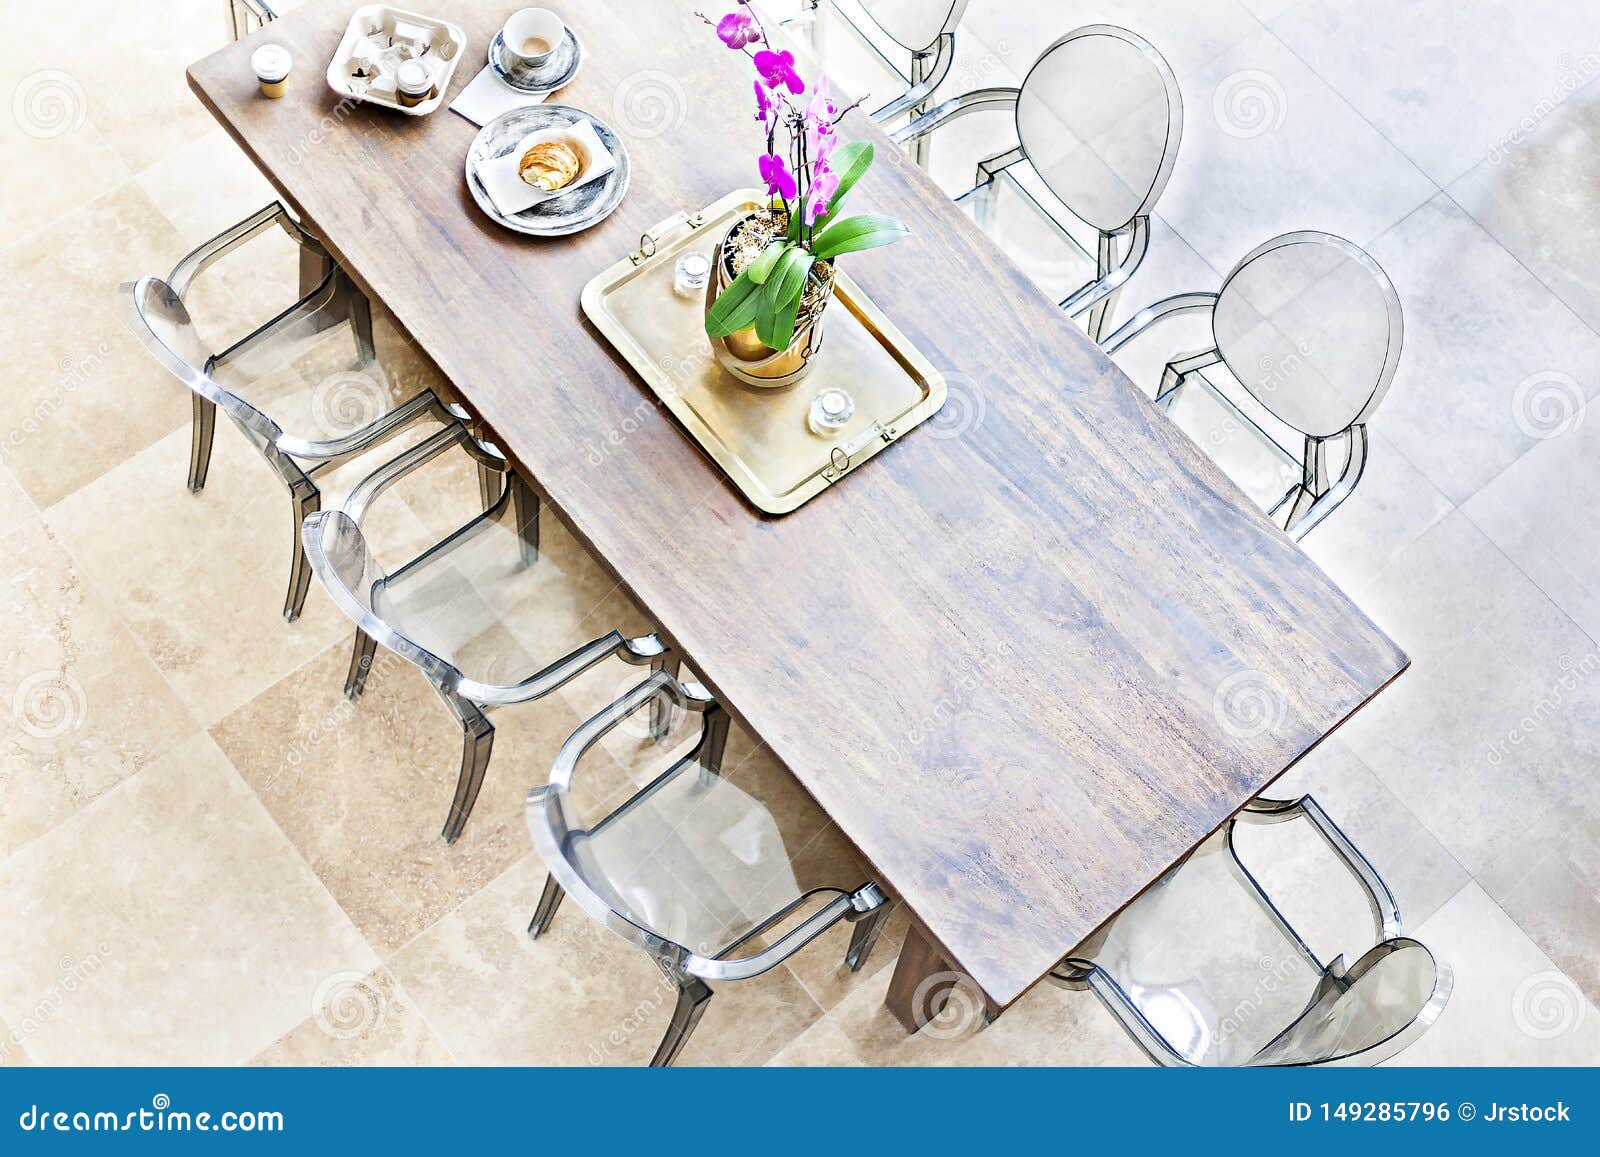 Wooden Dining Table Above View with Plastic Chairs Stock Photo - Image